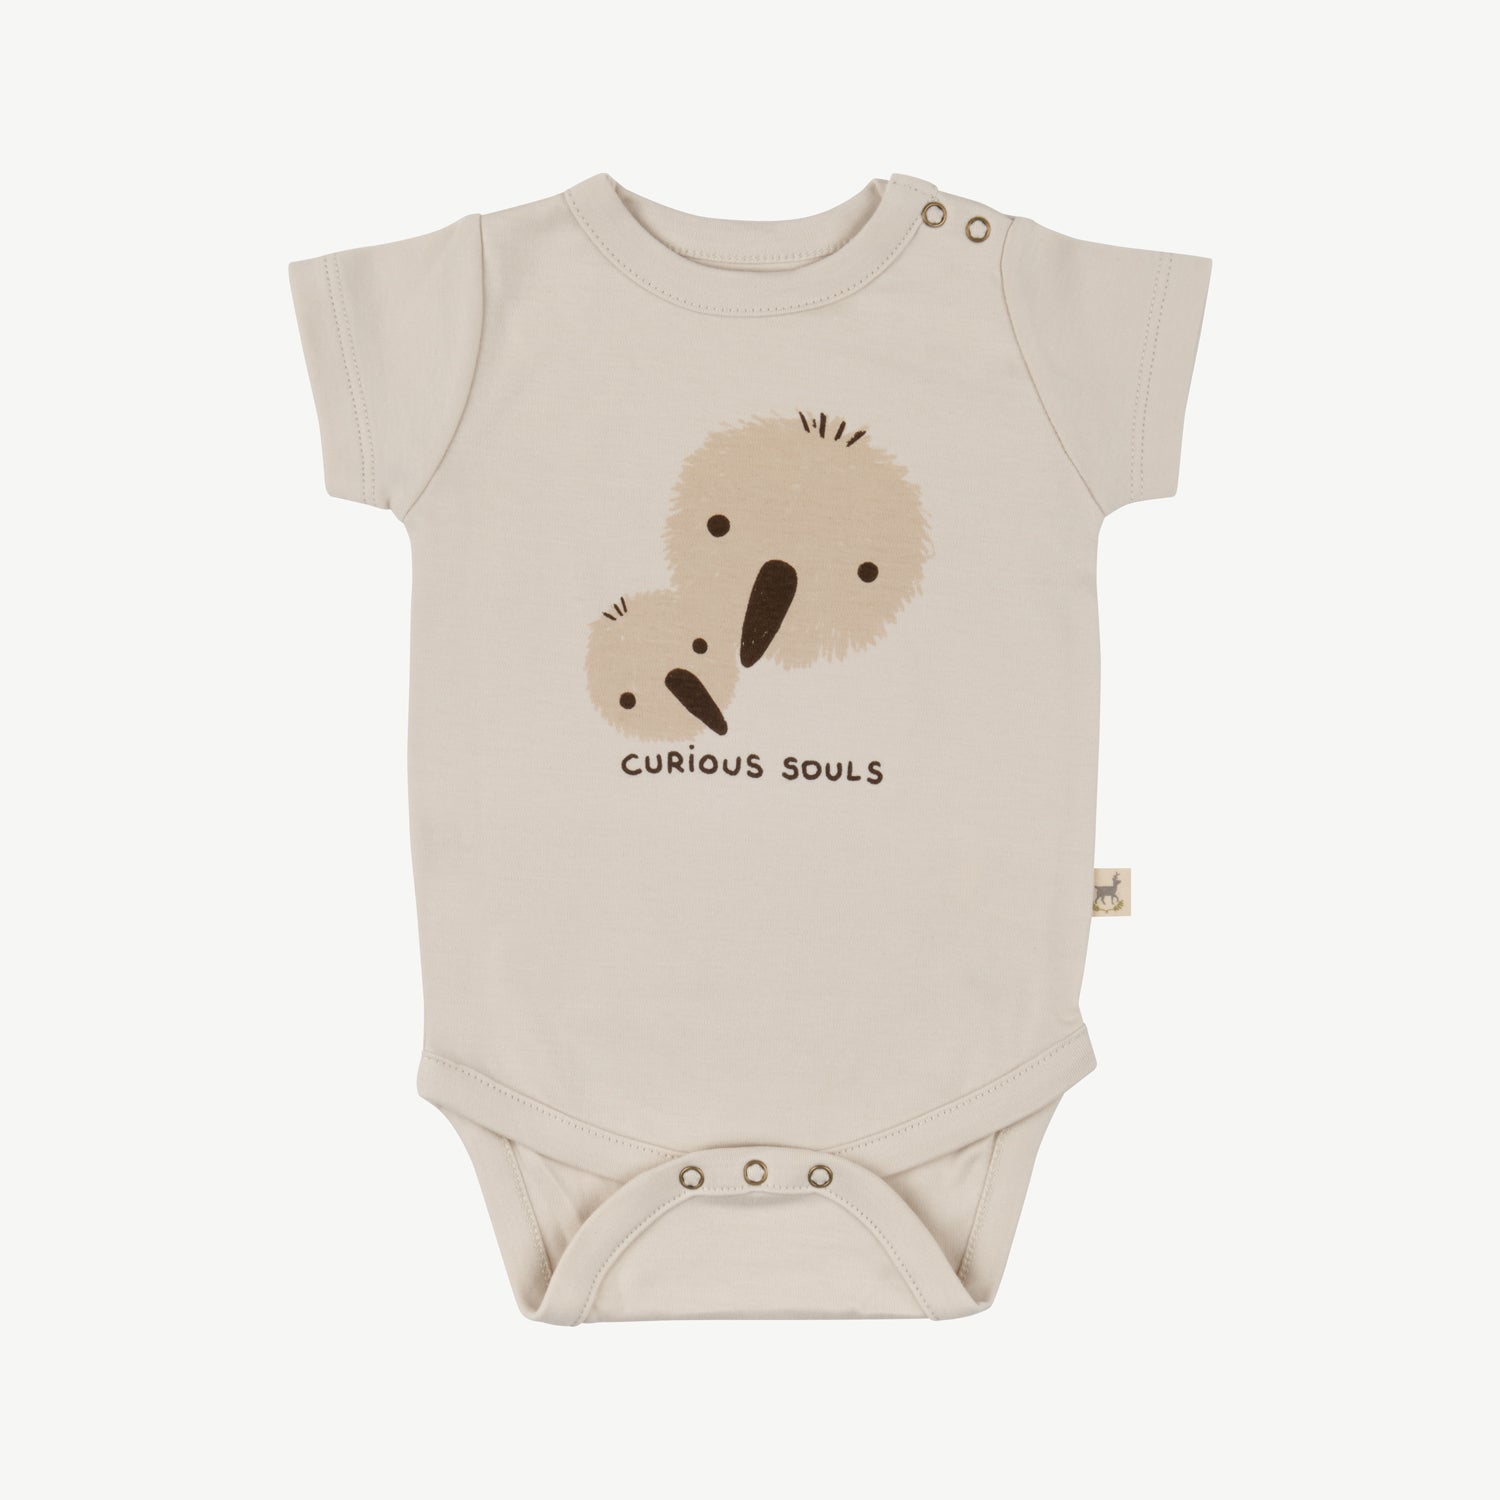 'curious souls' rainy day onesie + pants baby outfit